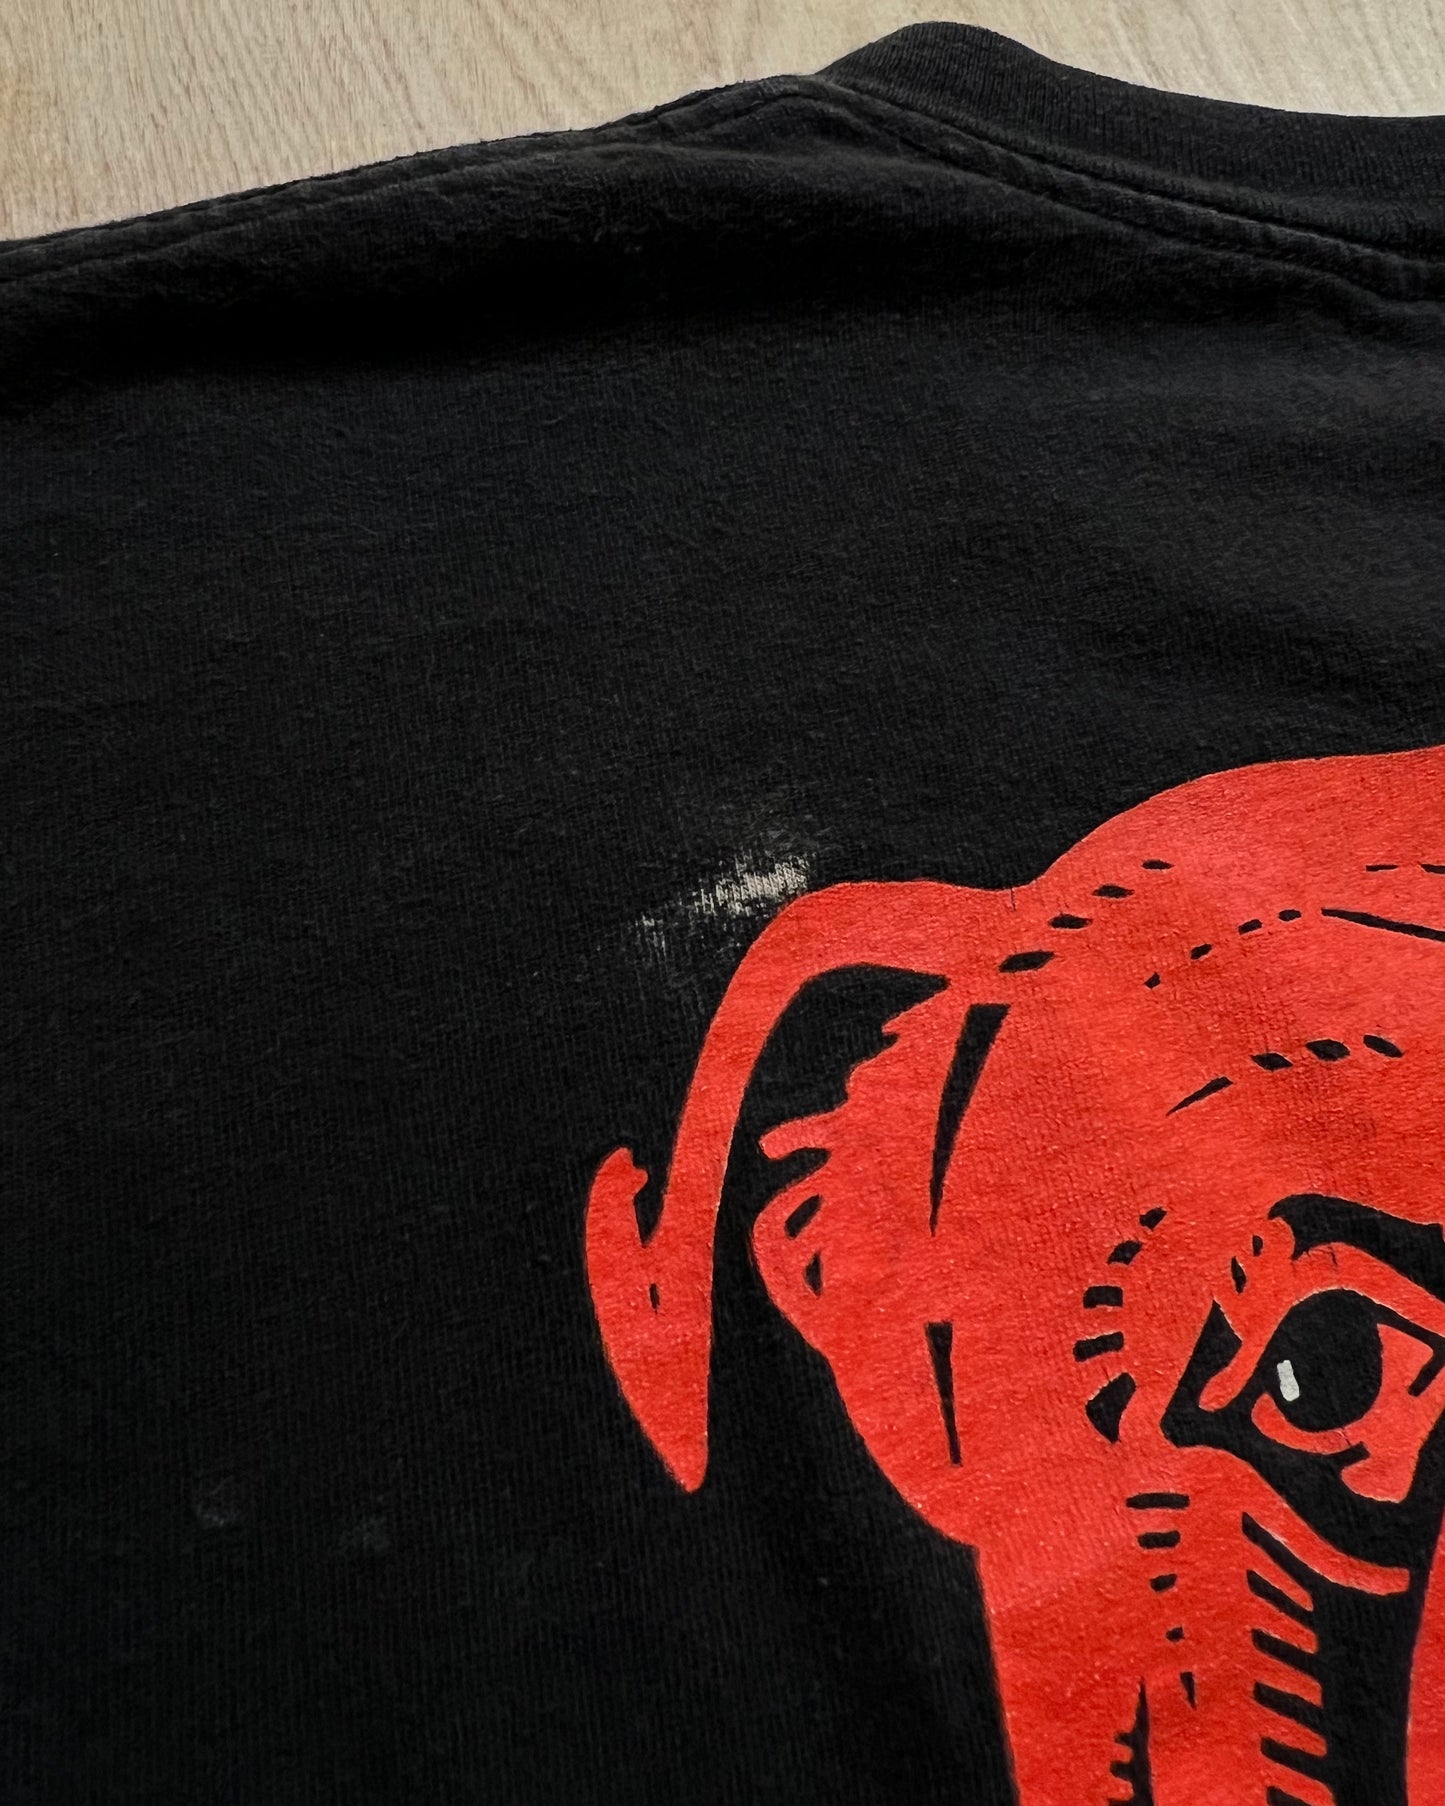 1995 Red Dog "You are your own dog" Single Stitch T-Shirt